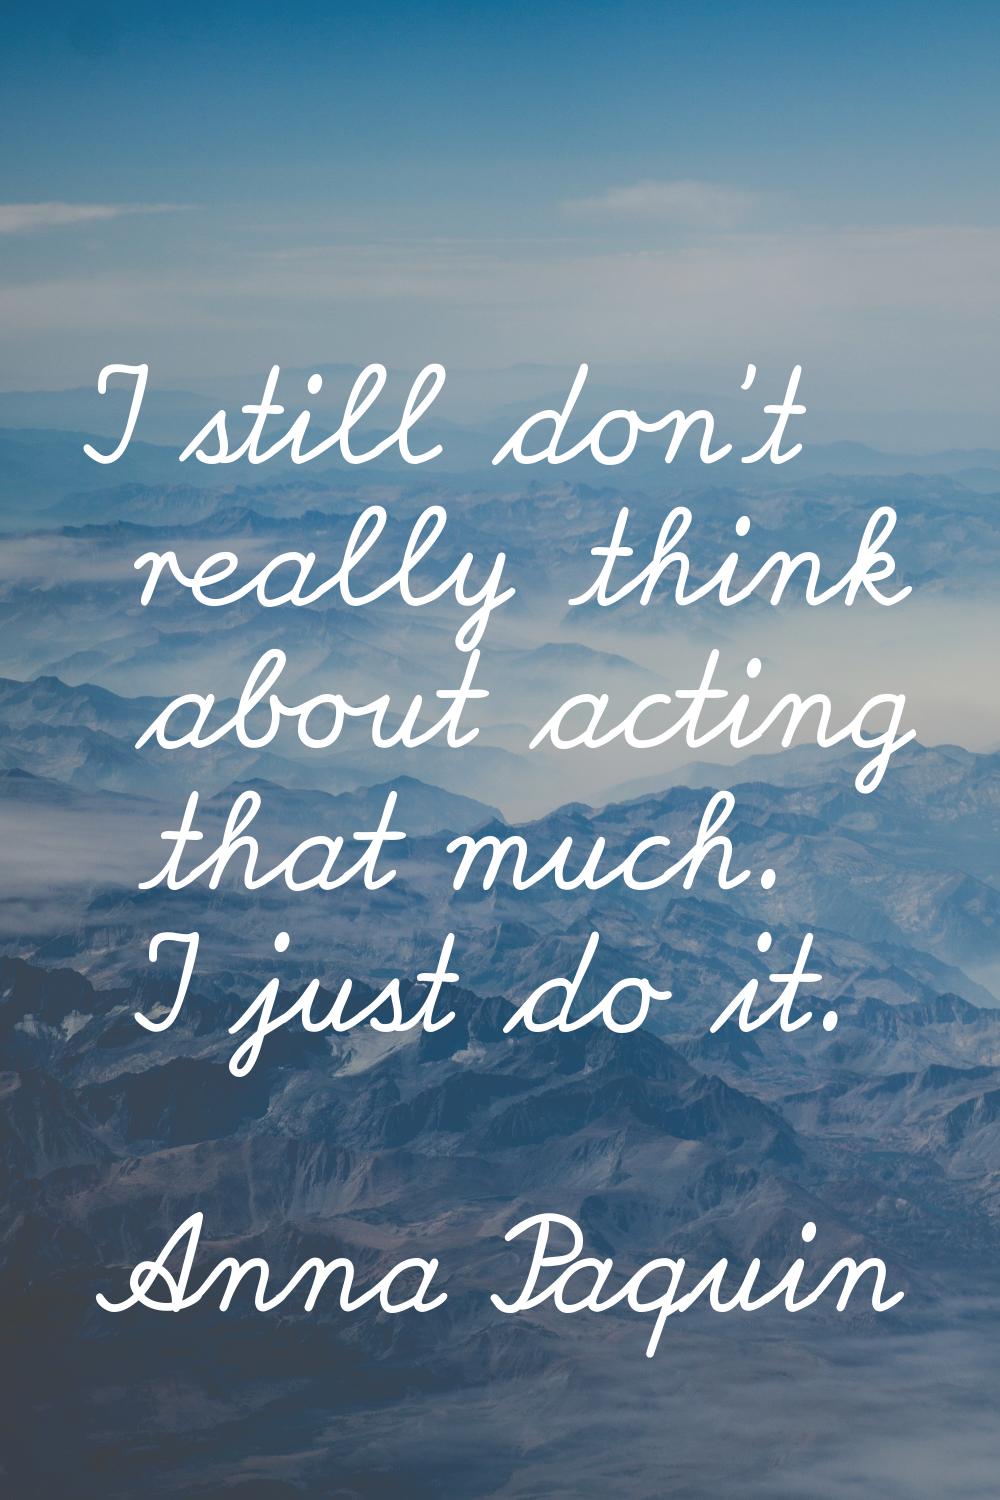 I still don't really think about acting that much. I just do it.